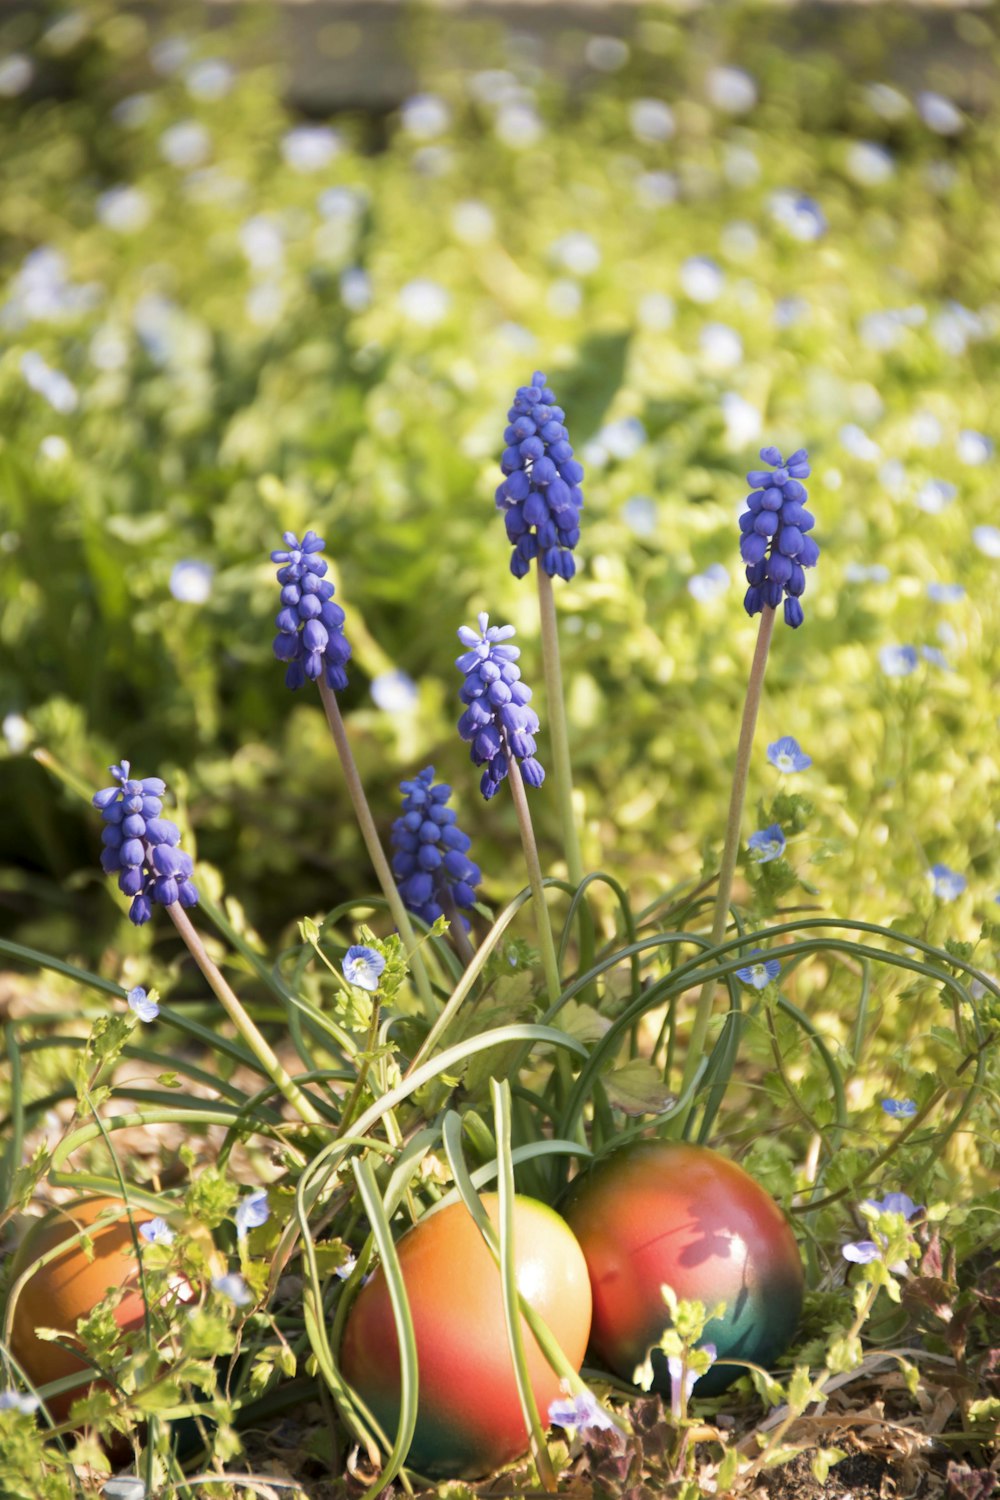 blue and red round fruit on green grass during daytime